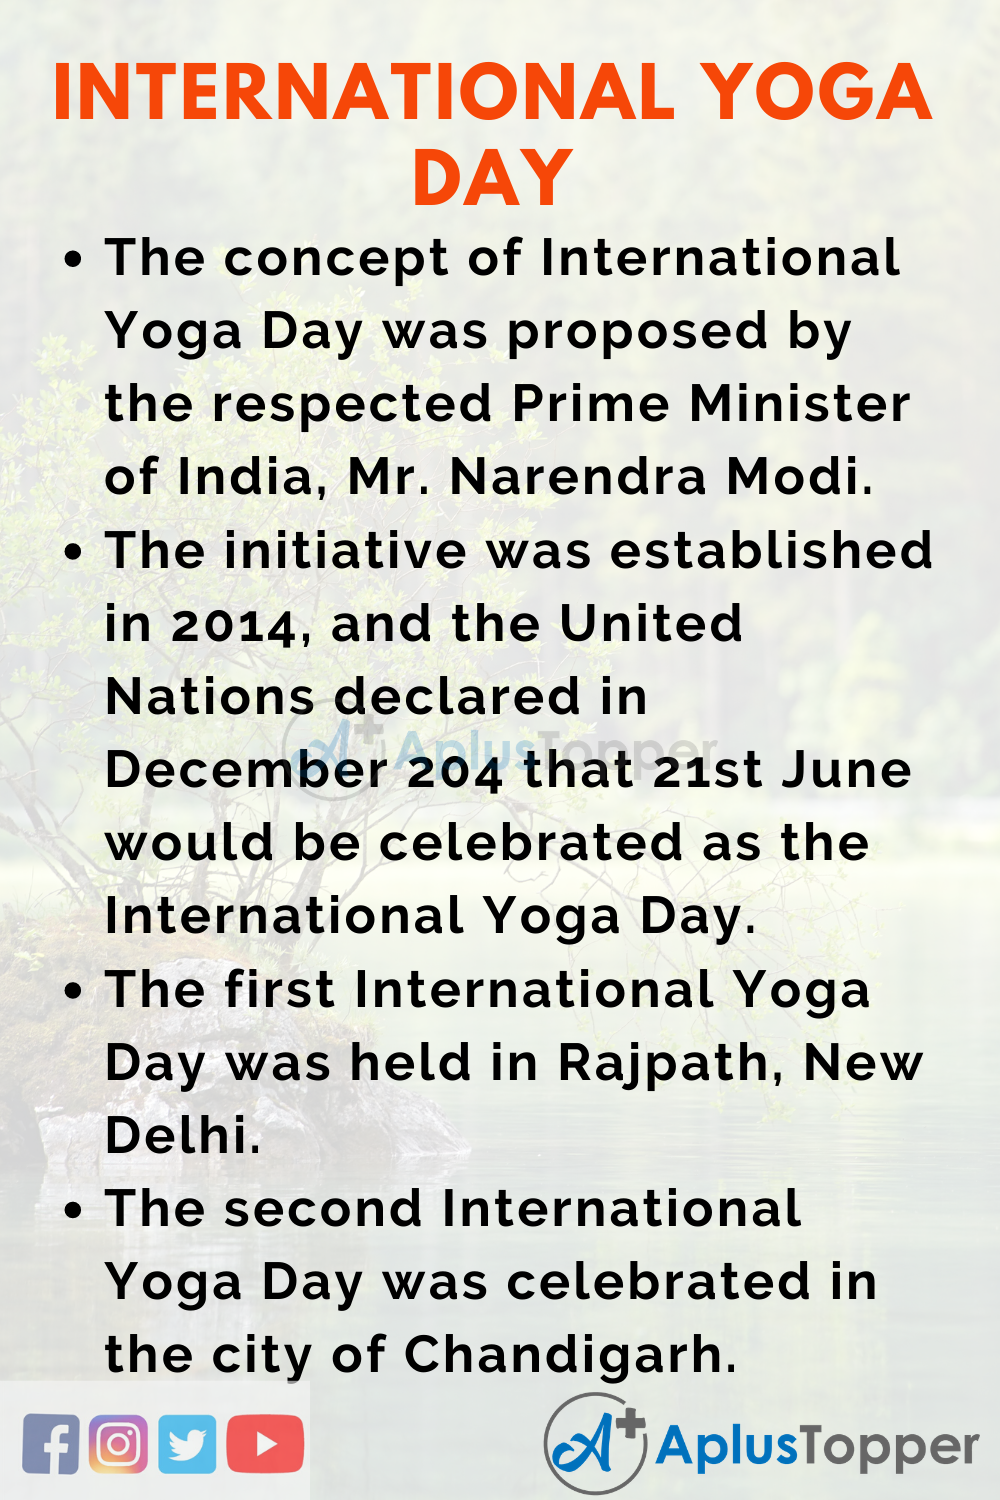 https://www.aplustopper.com/wp-content/uploads/2020/05/Essay-about-International-Yoga-Day.png